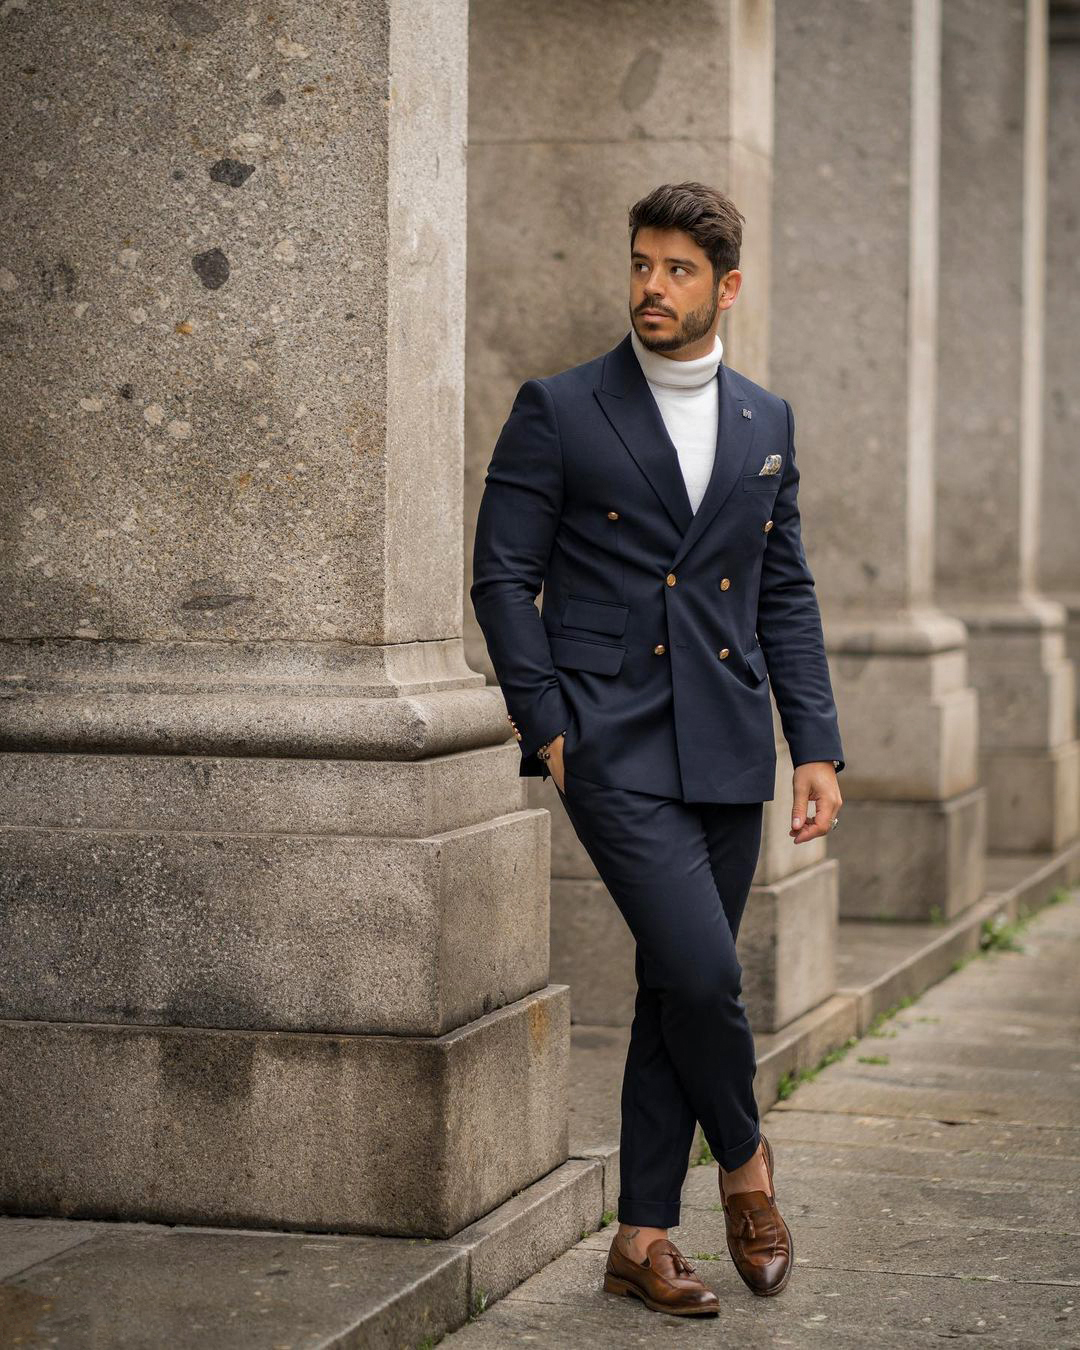 casual wear: double-breasted navy suit, white turtleneck, and brown loafers